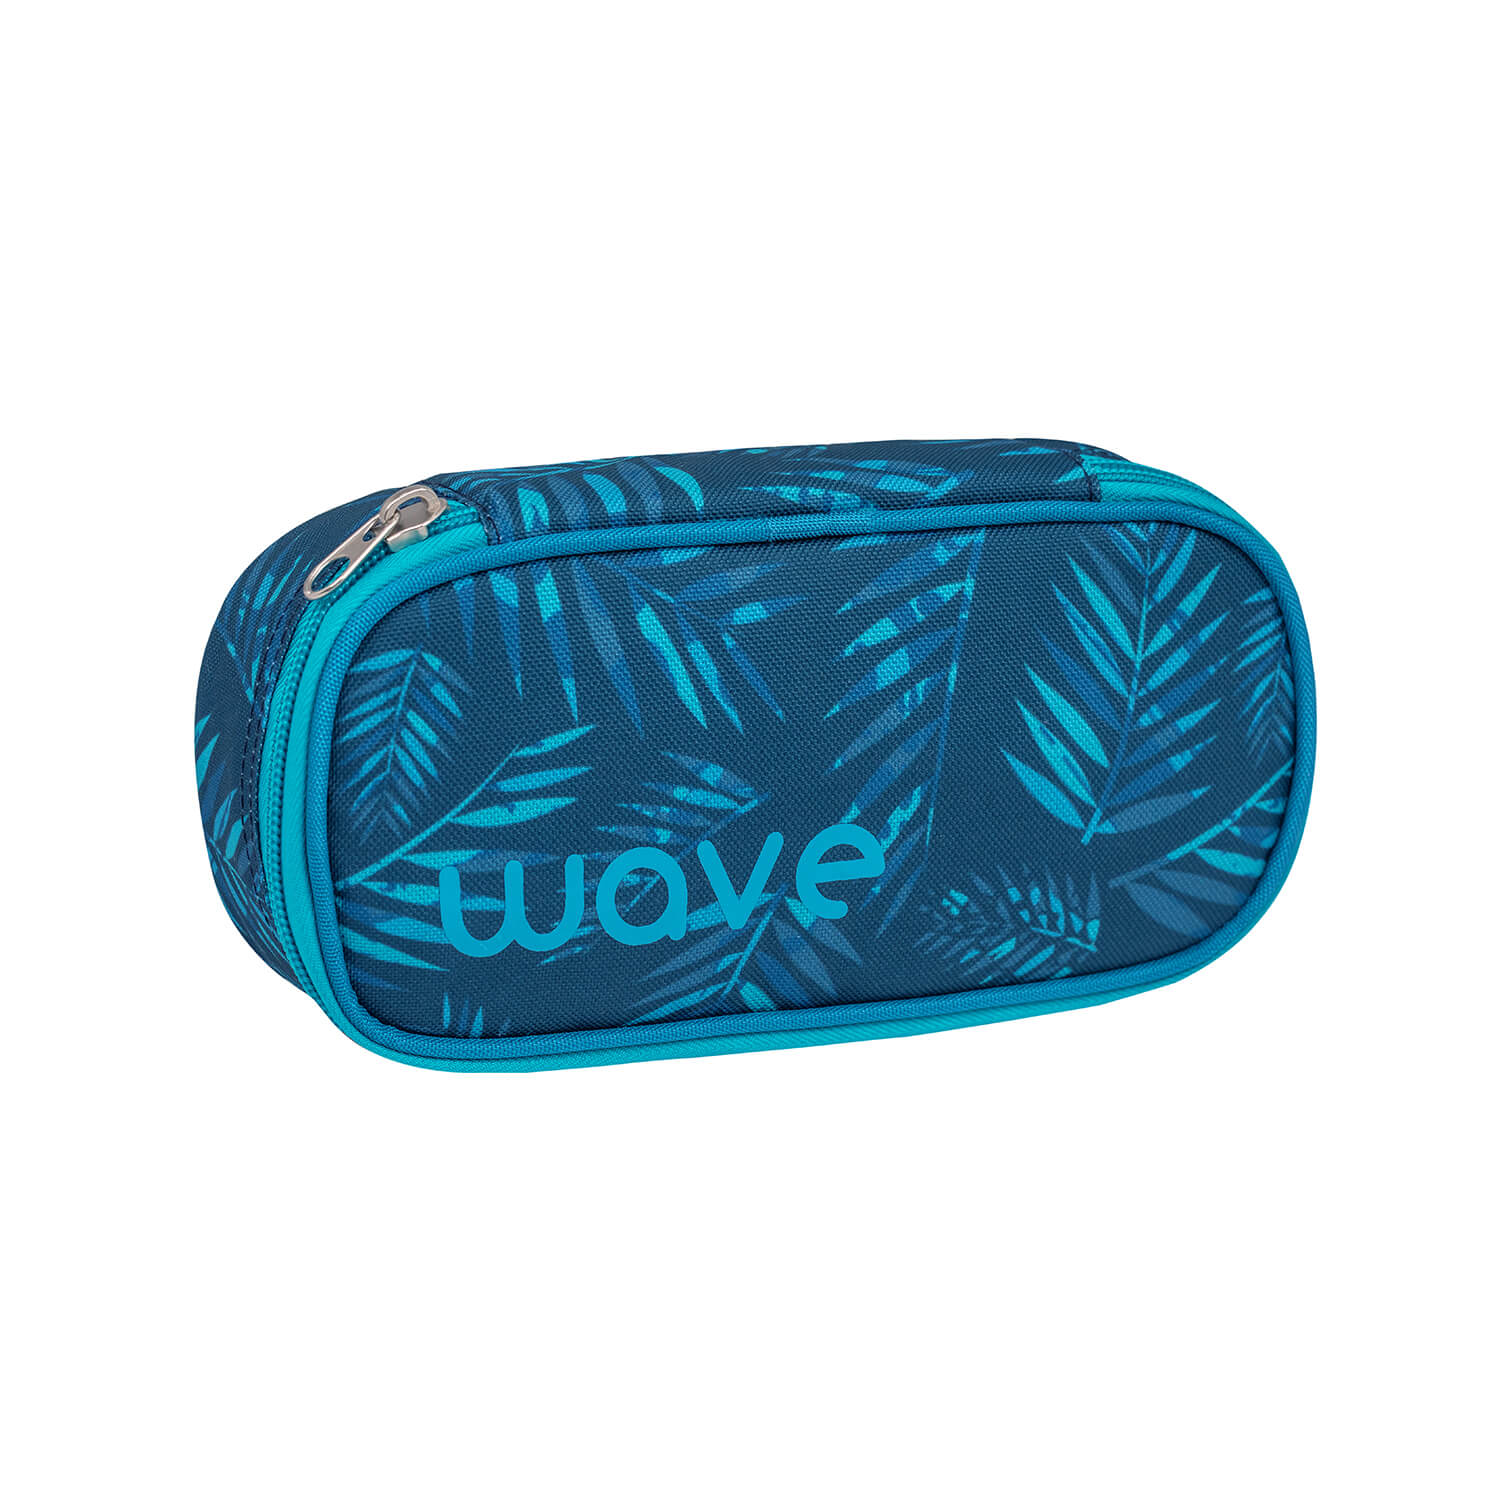 WAVE pencil pouch Feathers - Jungle Vibe with GRATIS pencil pouch